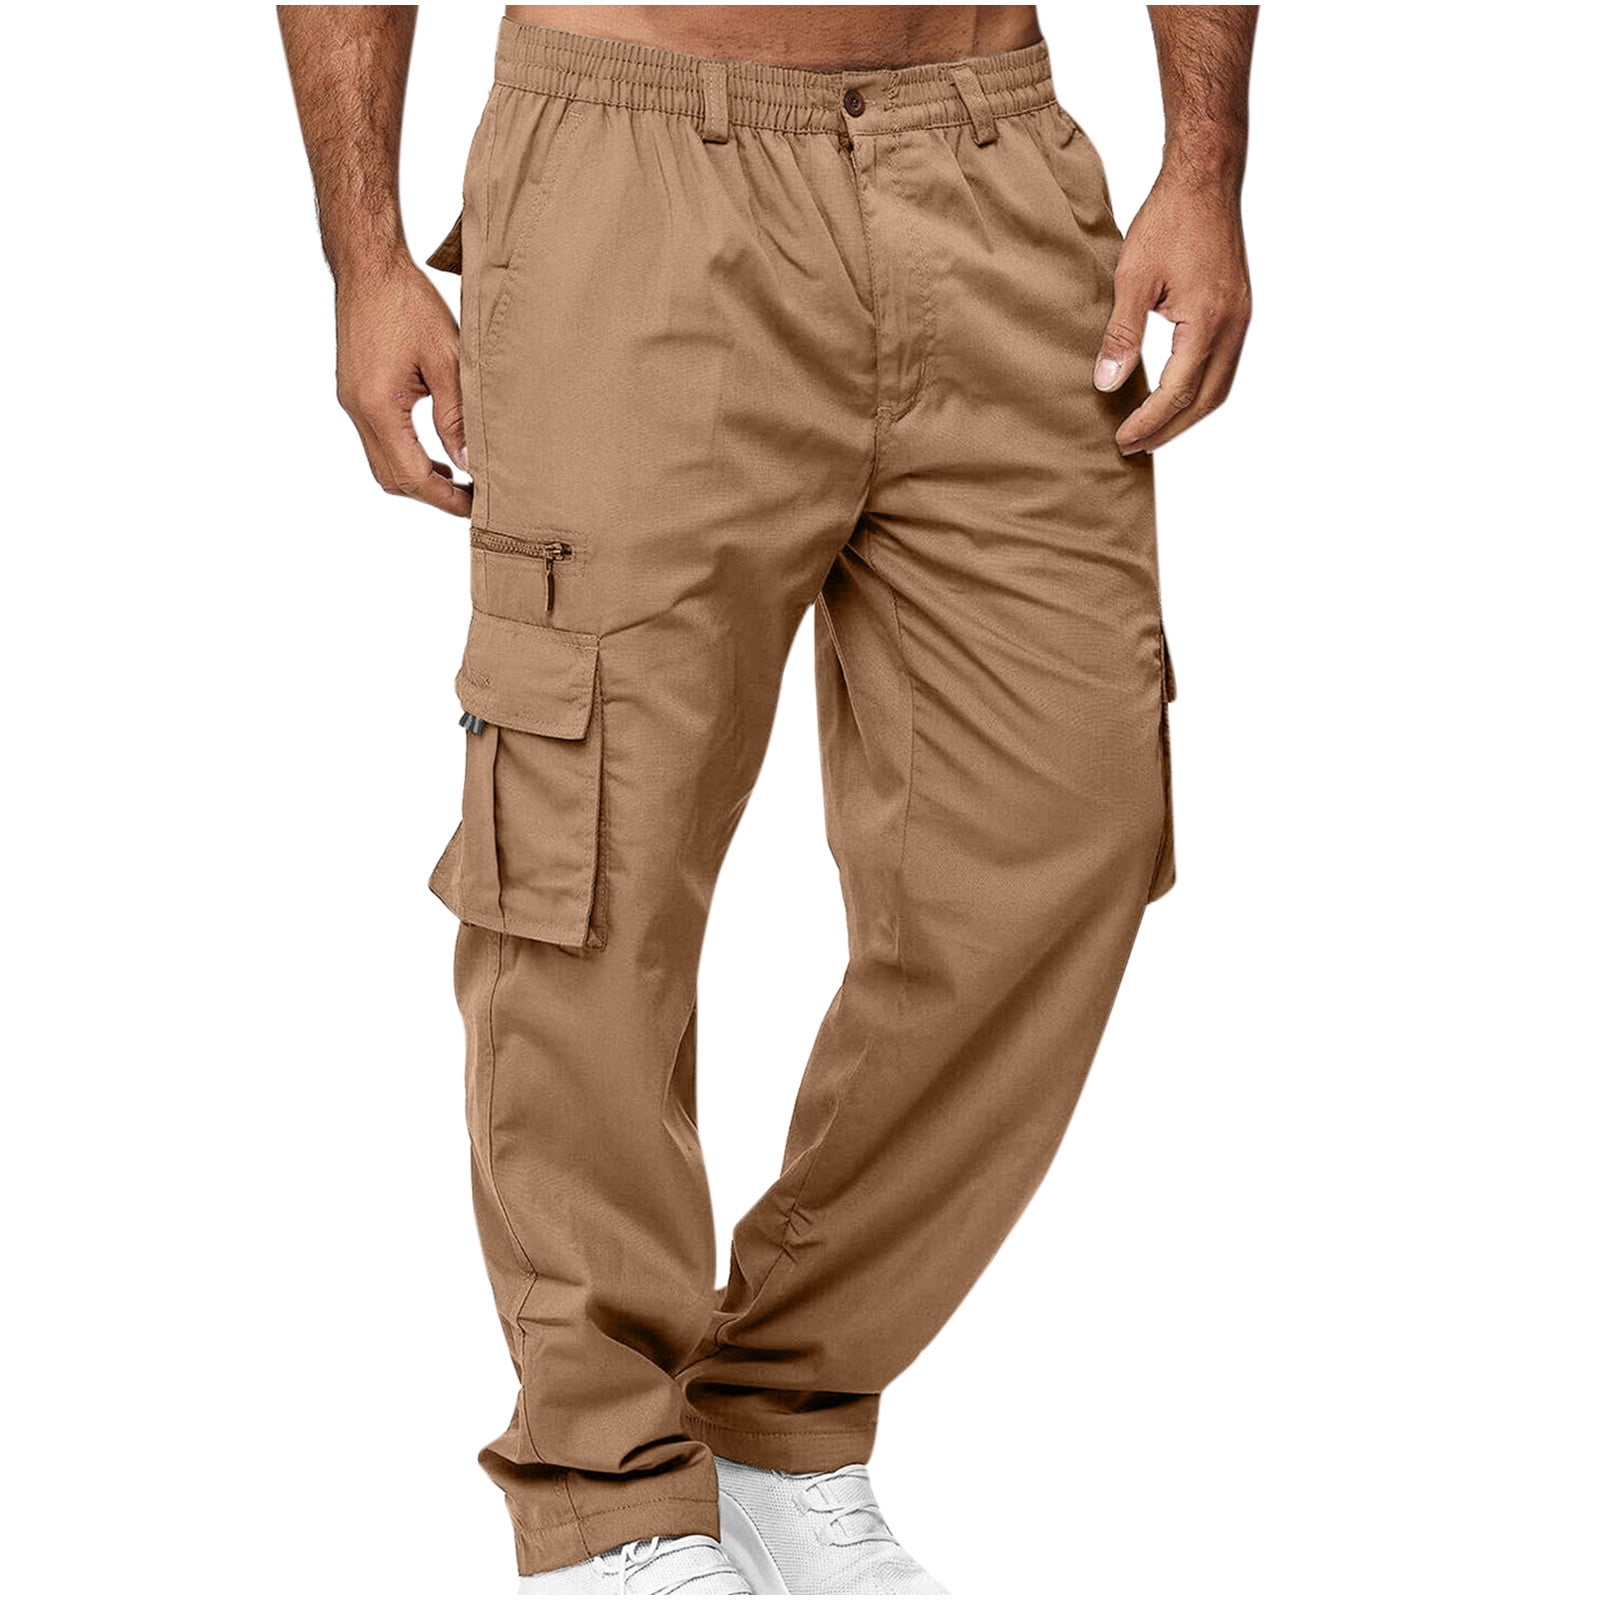 TRGPSG Men's Cargo Pants Outdoor Tactical Camo Hiking Pants Multi-Pocket Relaxed Fit Cotton Casual Work Pants 